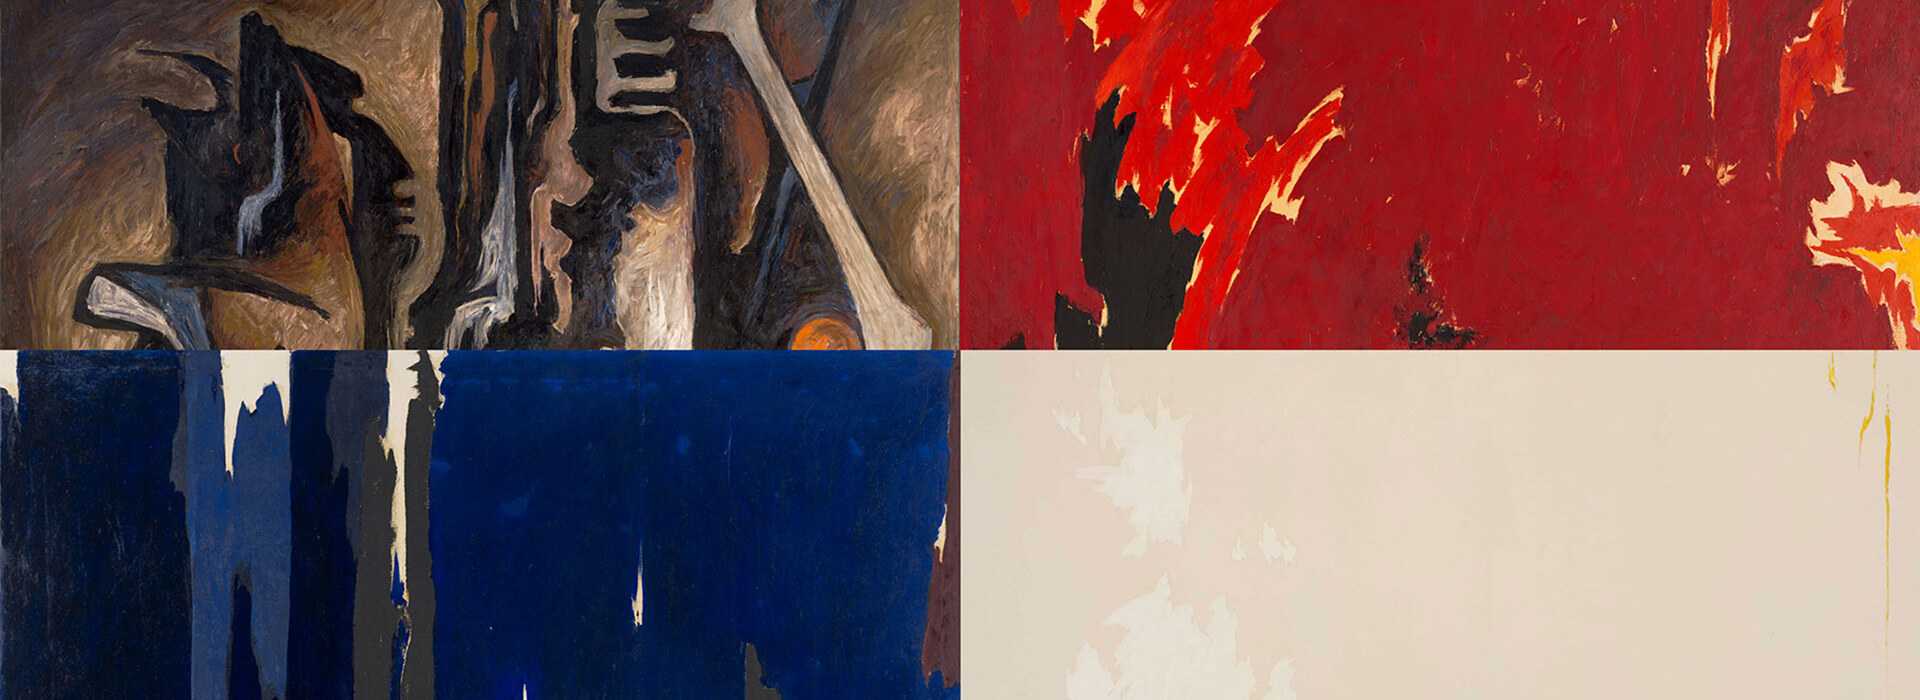 Photo illustration of four paintings by Clyfford Still; Clockwise from top left: details of PH-751 (1944), PH-1034, 1973, PH-716 (1970), PH-268 (1955).